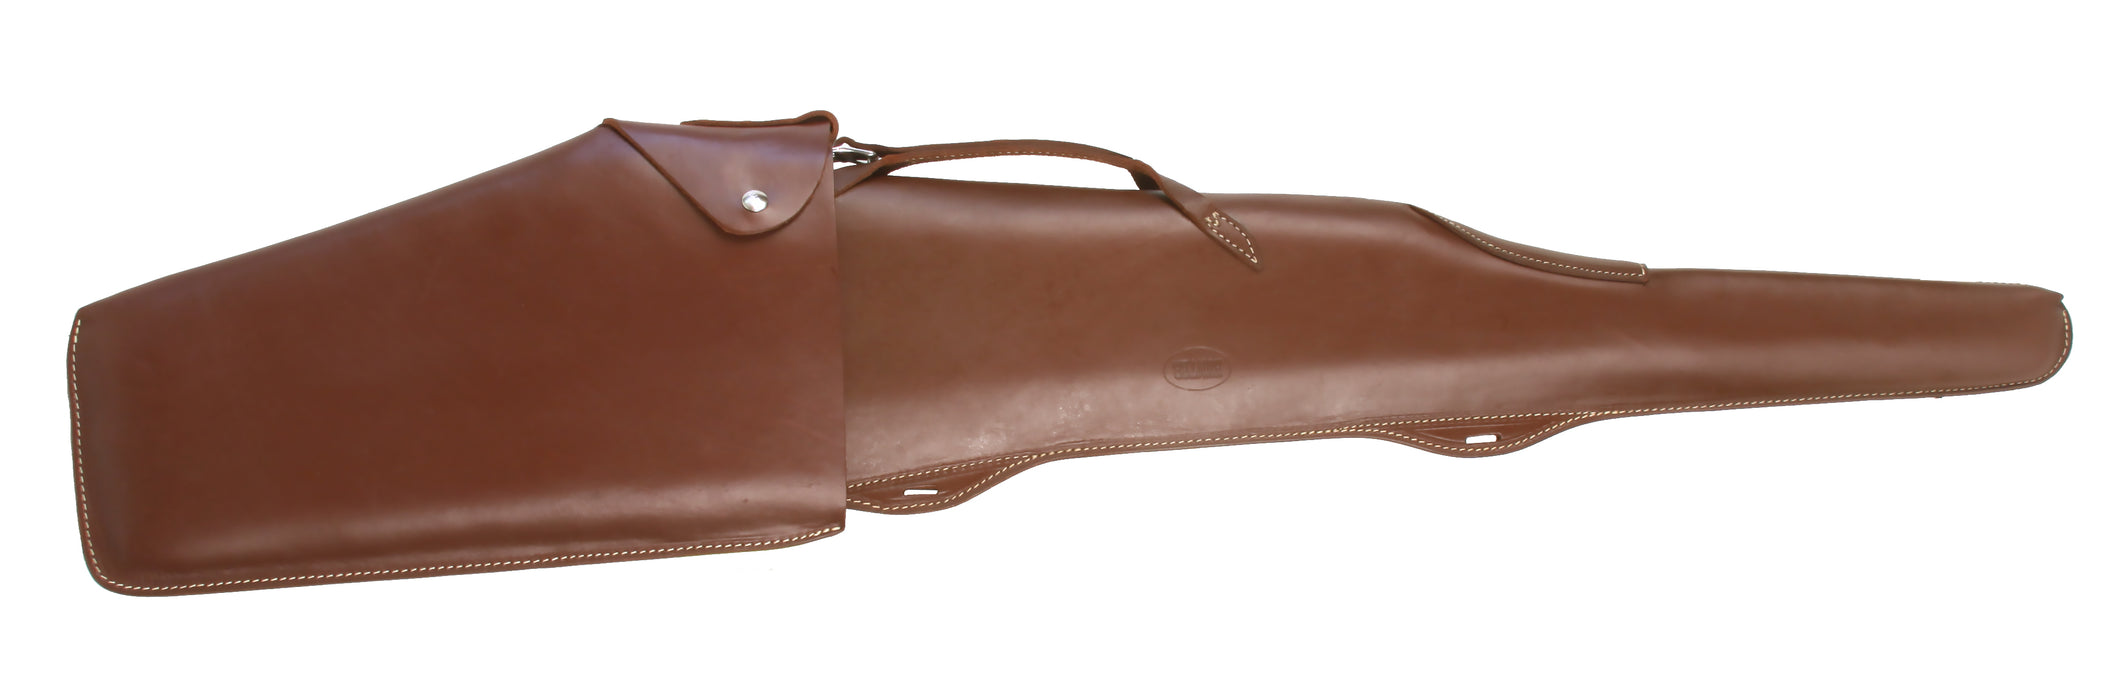 Full Length Leather Scabbard -  26"